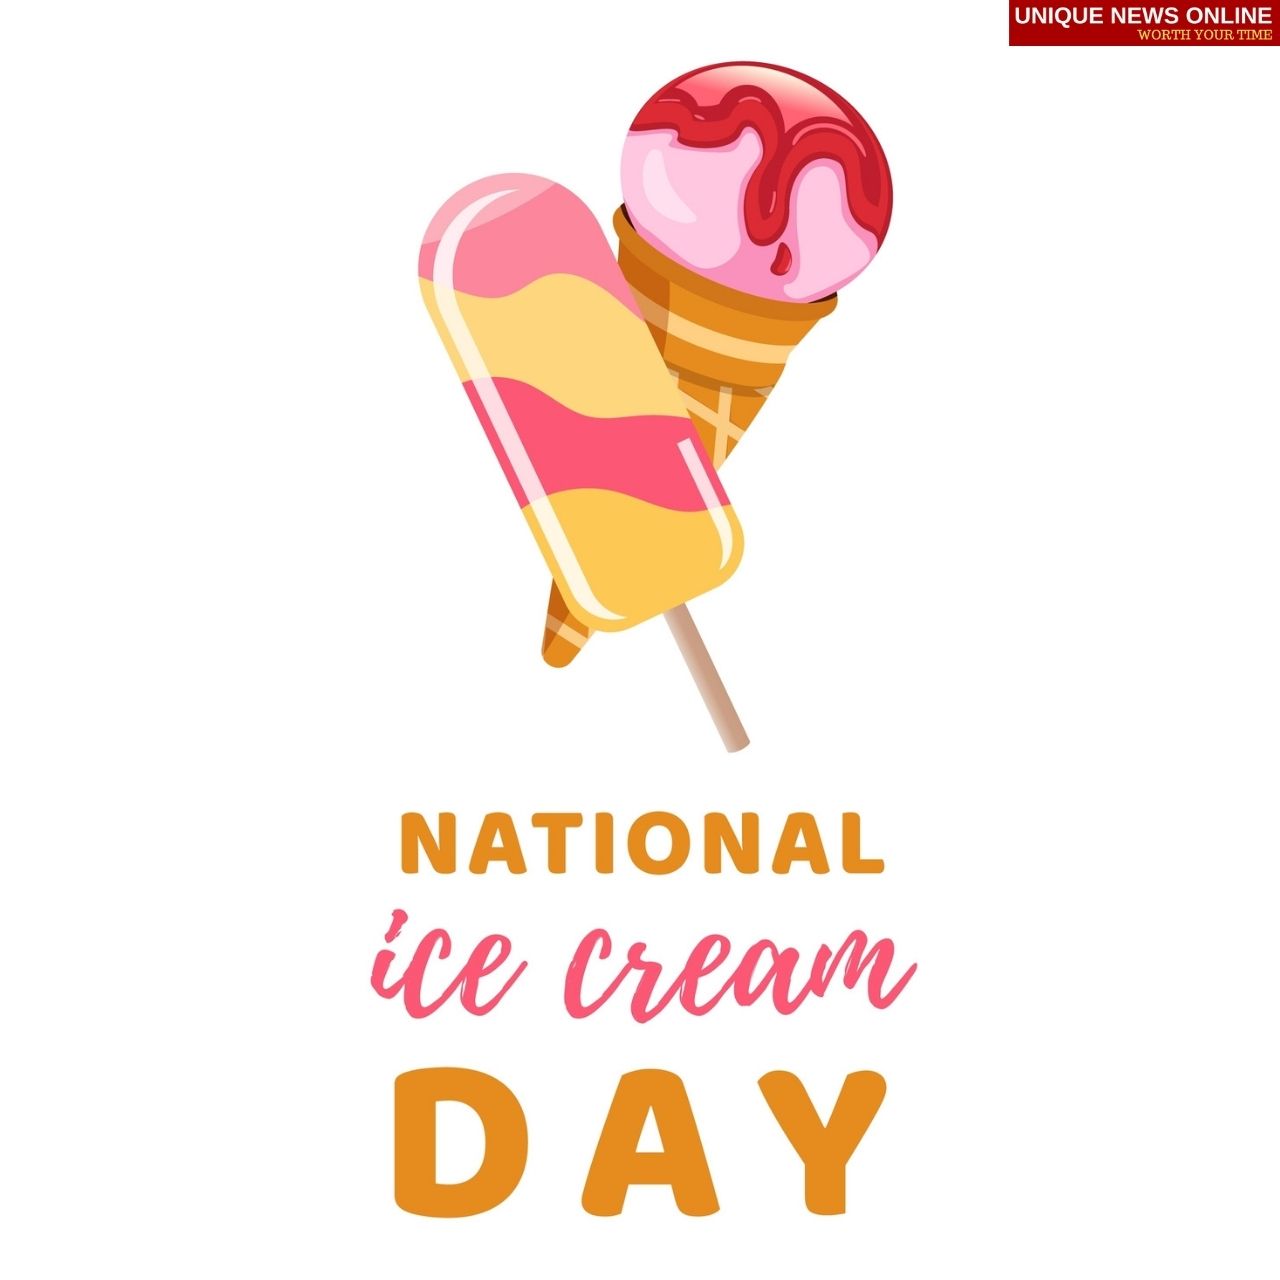 National Ice Cream Day (US) 2021 Quotes, Wishes, Images, and Poster to